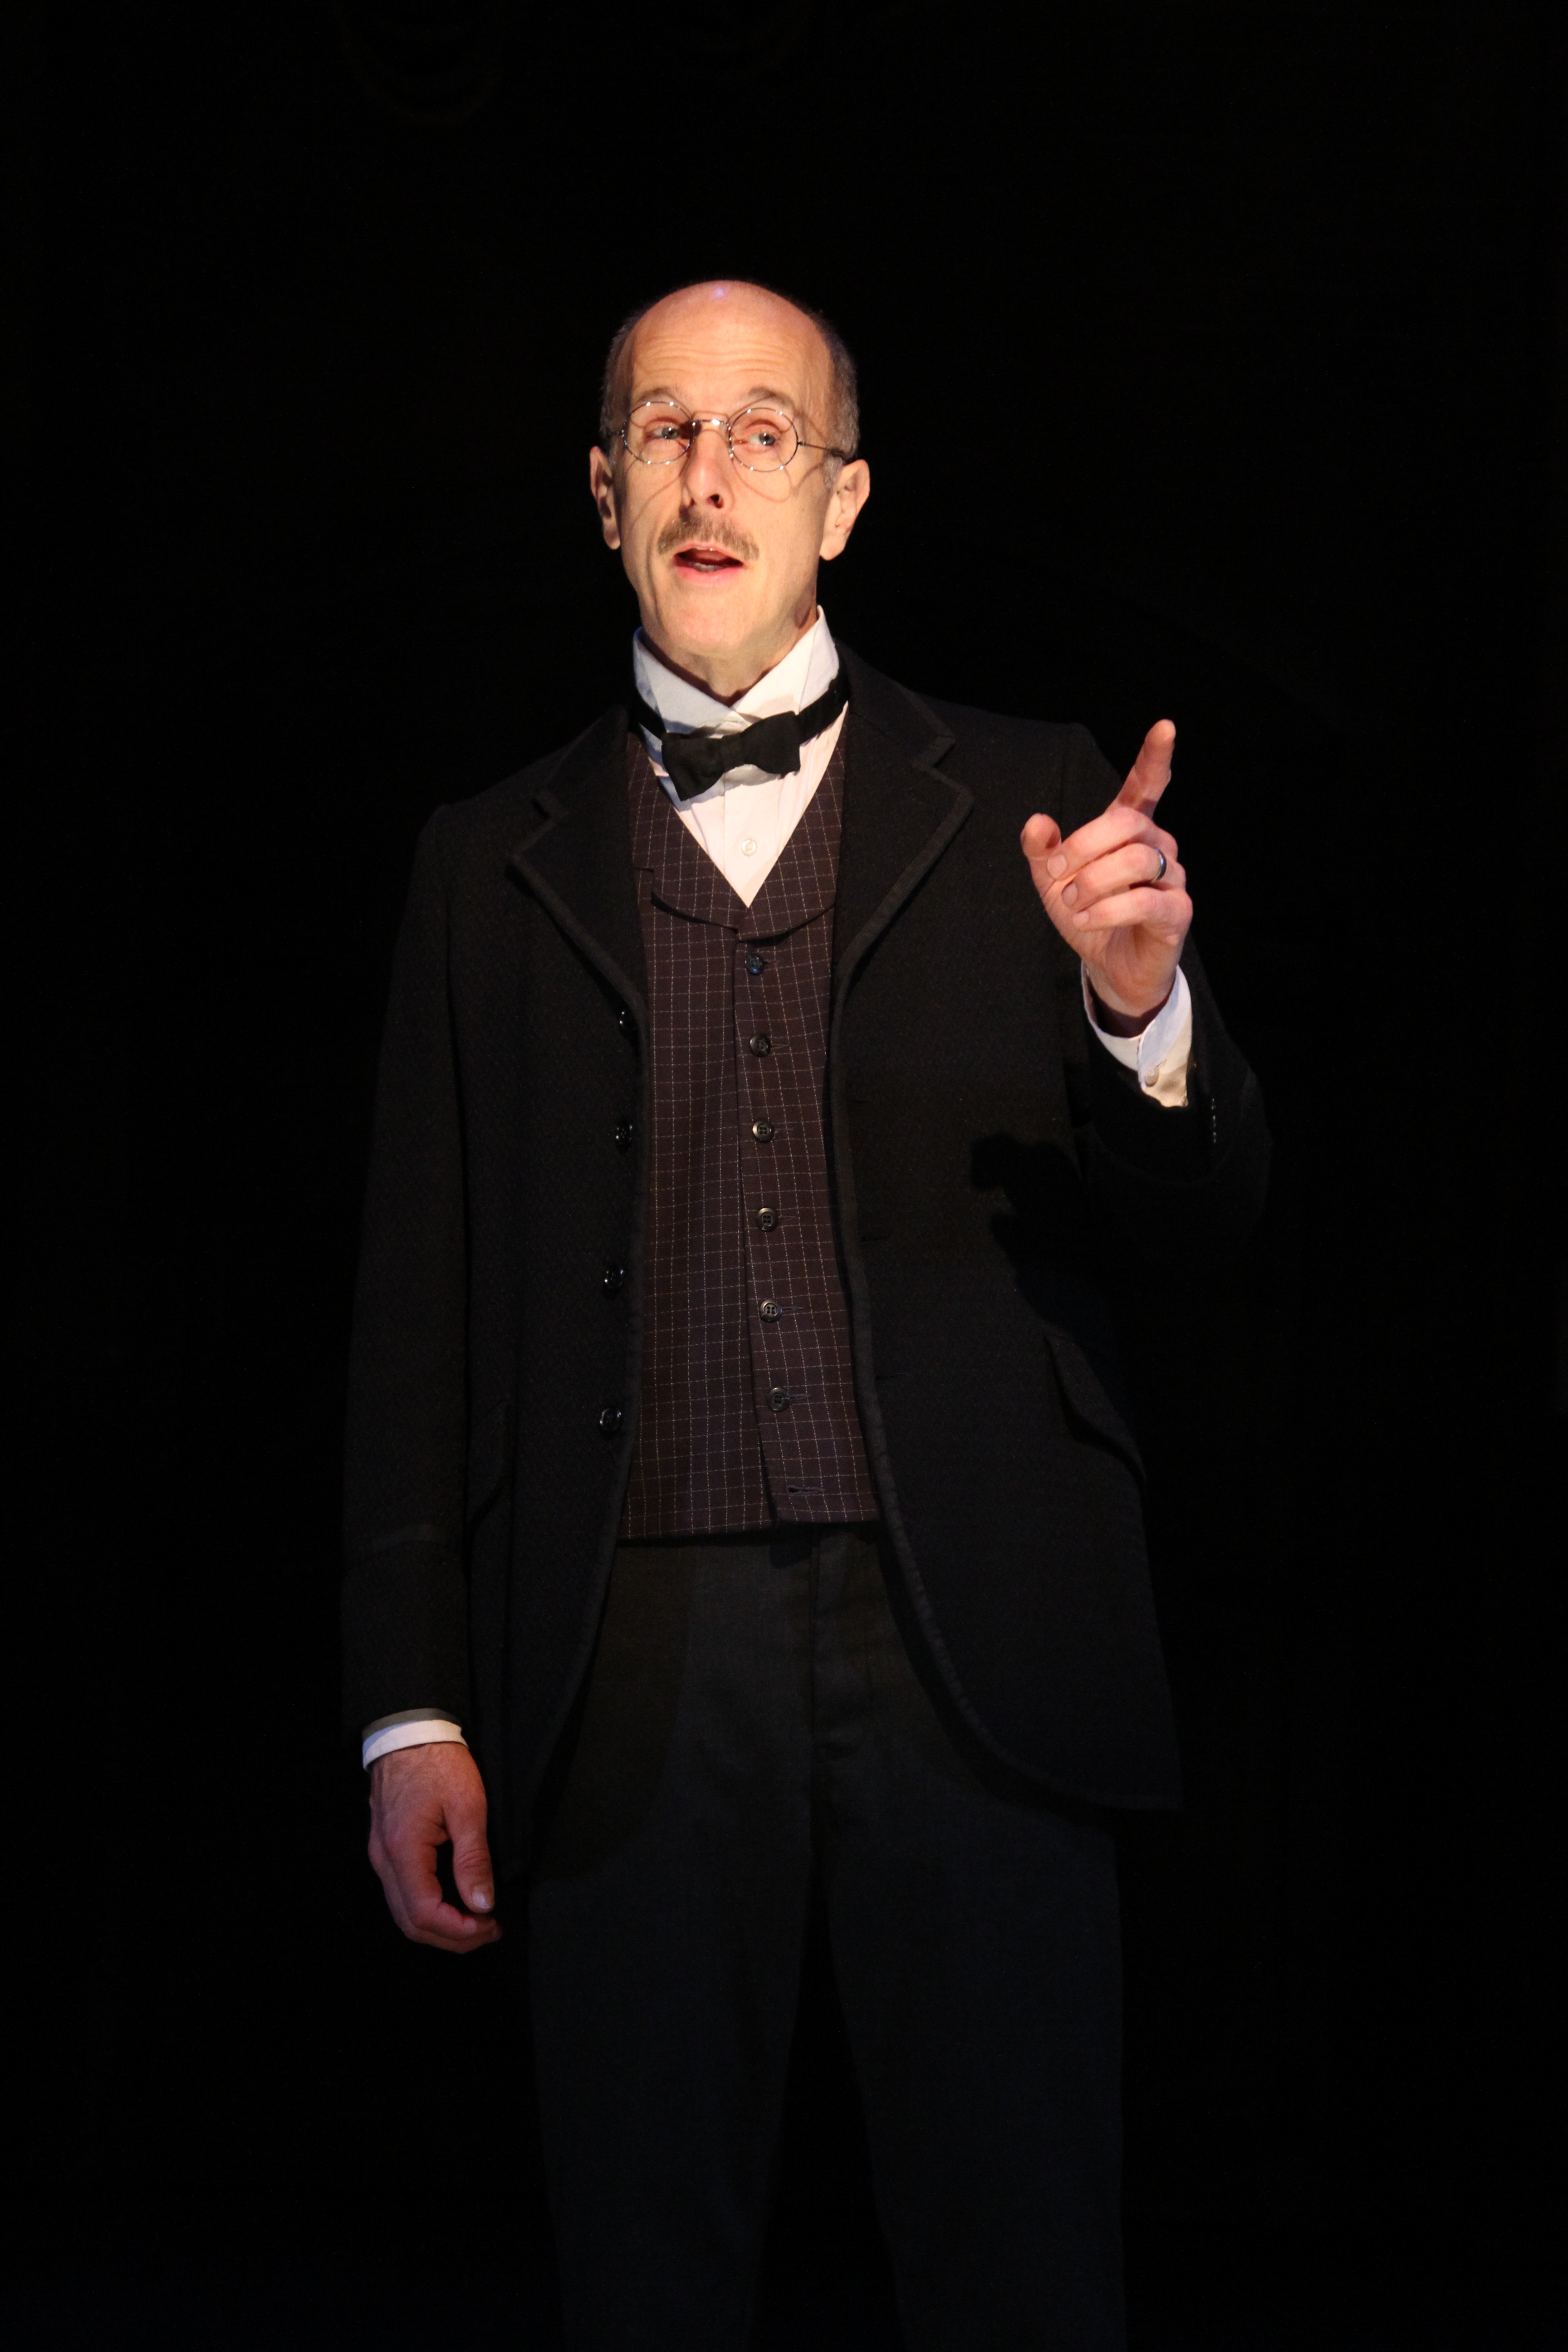 James Michael Reilly in OUR TOWN, Shakespeare Theatre of New Jersey, 2013